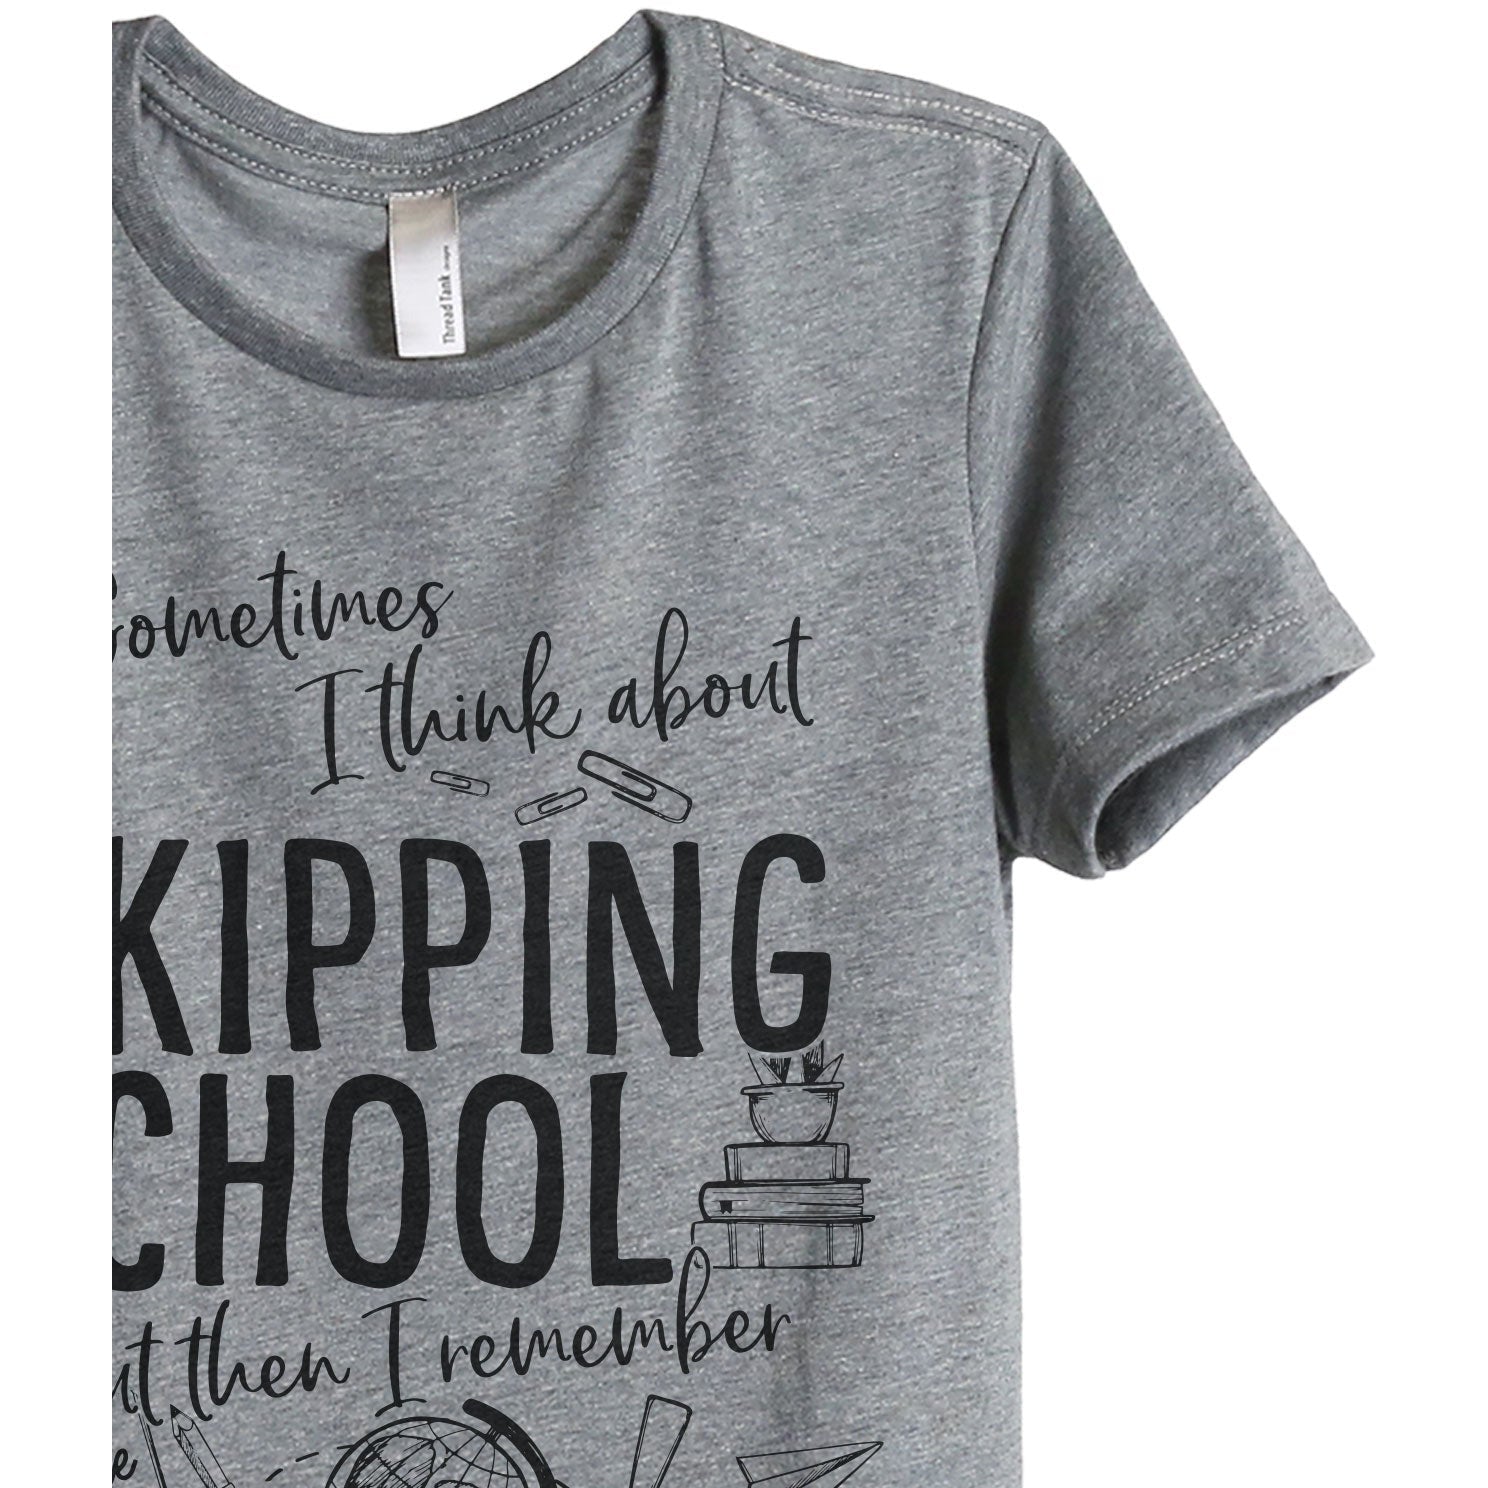 Skipping School But I'm The Teacher - Stories You Can Wear